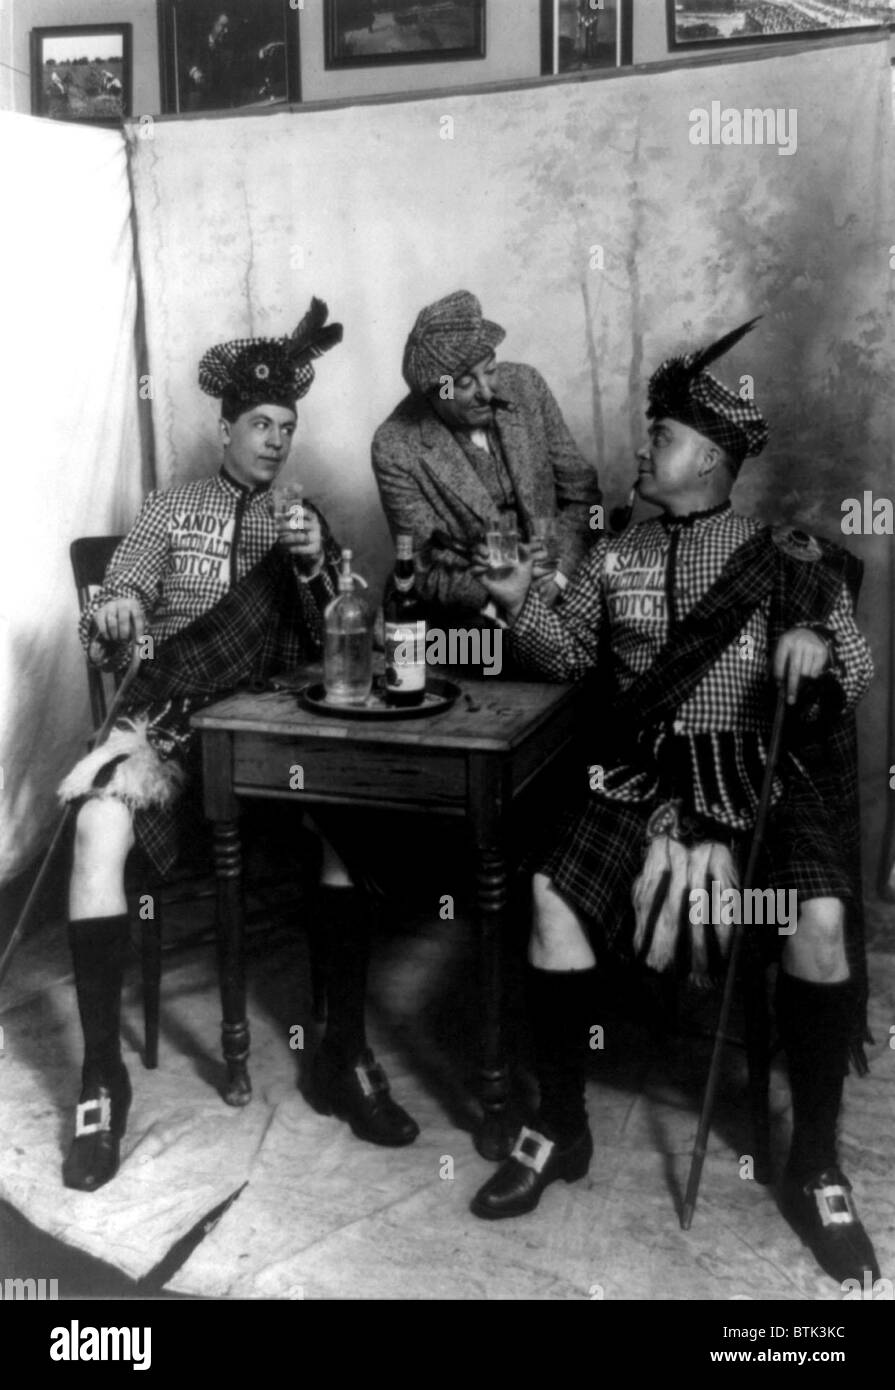 Two men wearing kilts seated at small table, drinking Sandy MacDonald scotch, with man standing and leaning against the table, photograph, 1913 Stock Photo